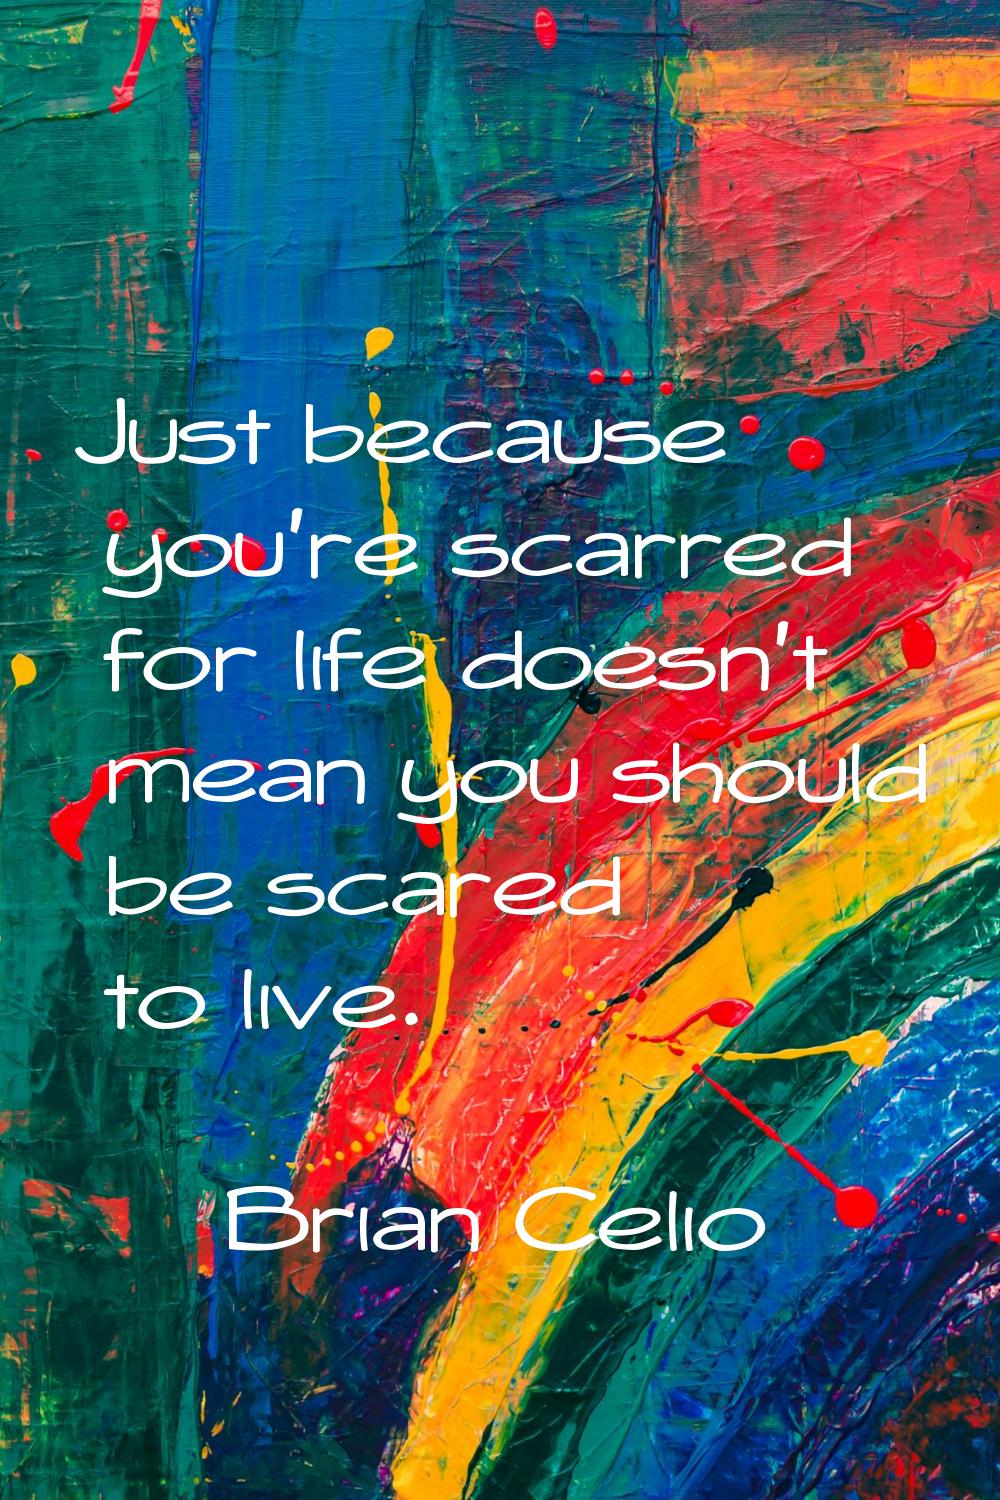 Just because you're scarred for life doesn't mean you should be scared to live.